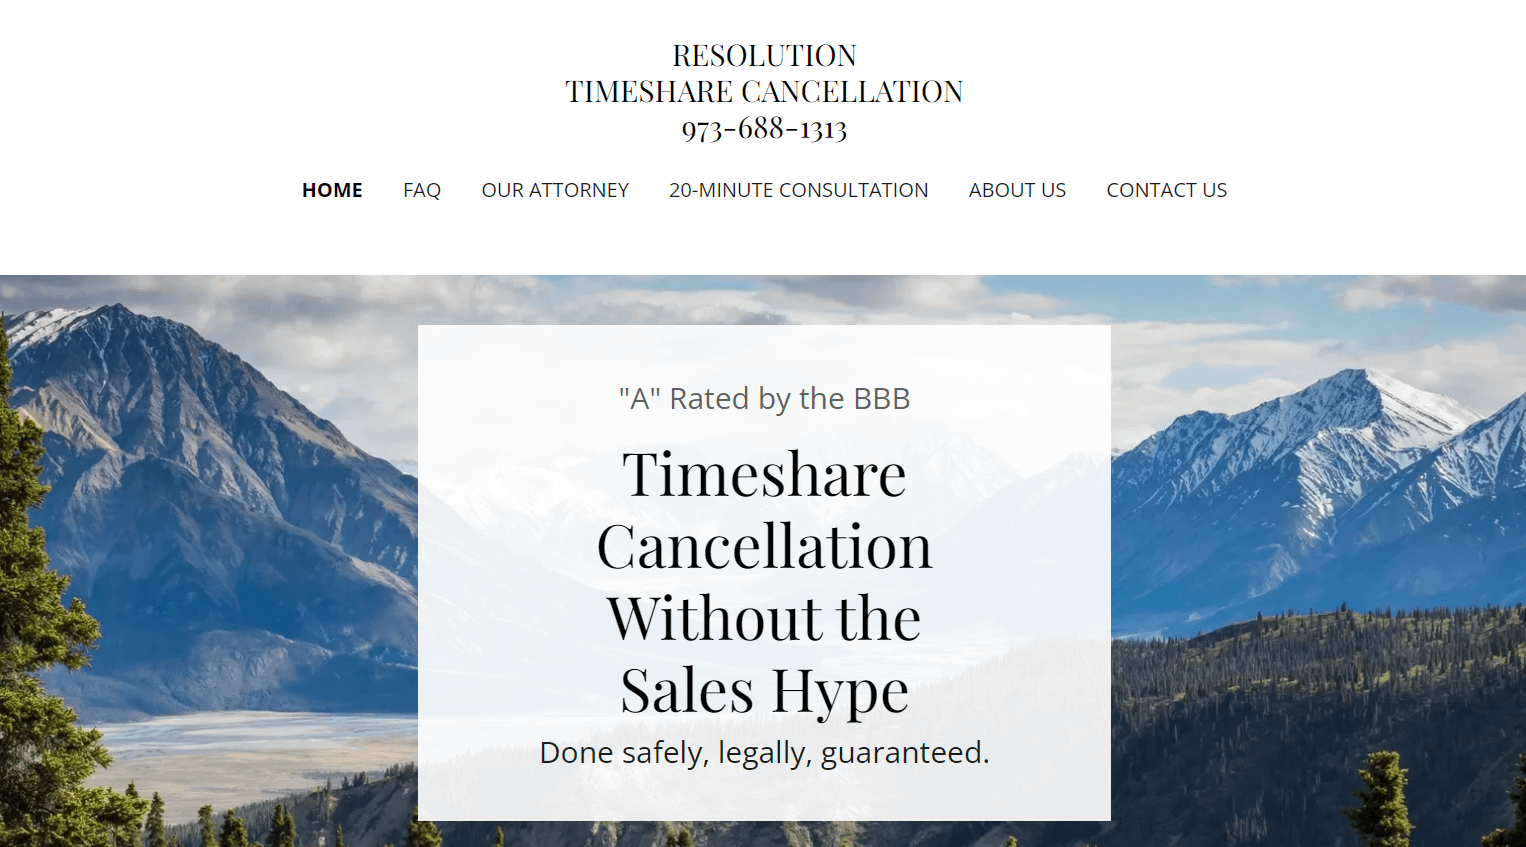 Resolution Timeshare Cancellation homepage